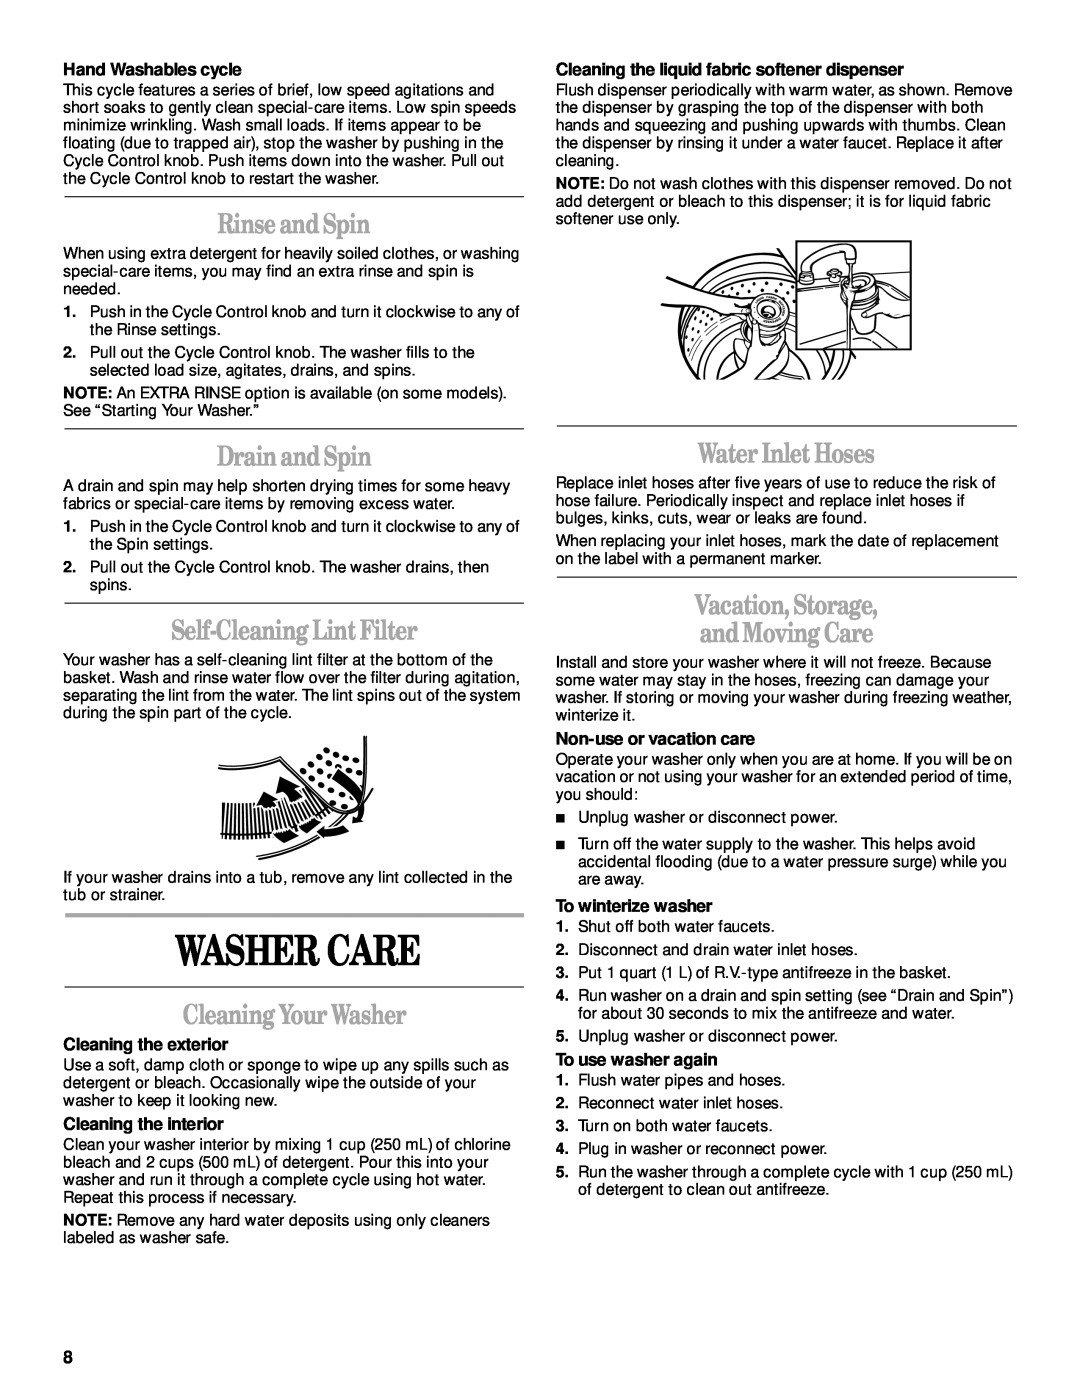 Whirlpool 3953953 manual Washer Care, Rinse and Spin, Drain and Spin, Self-Cleaning Lint Filter, Cleaning Your Washer 